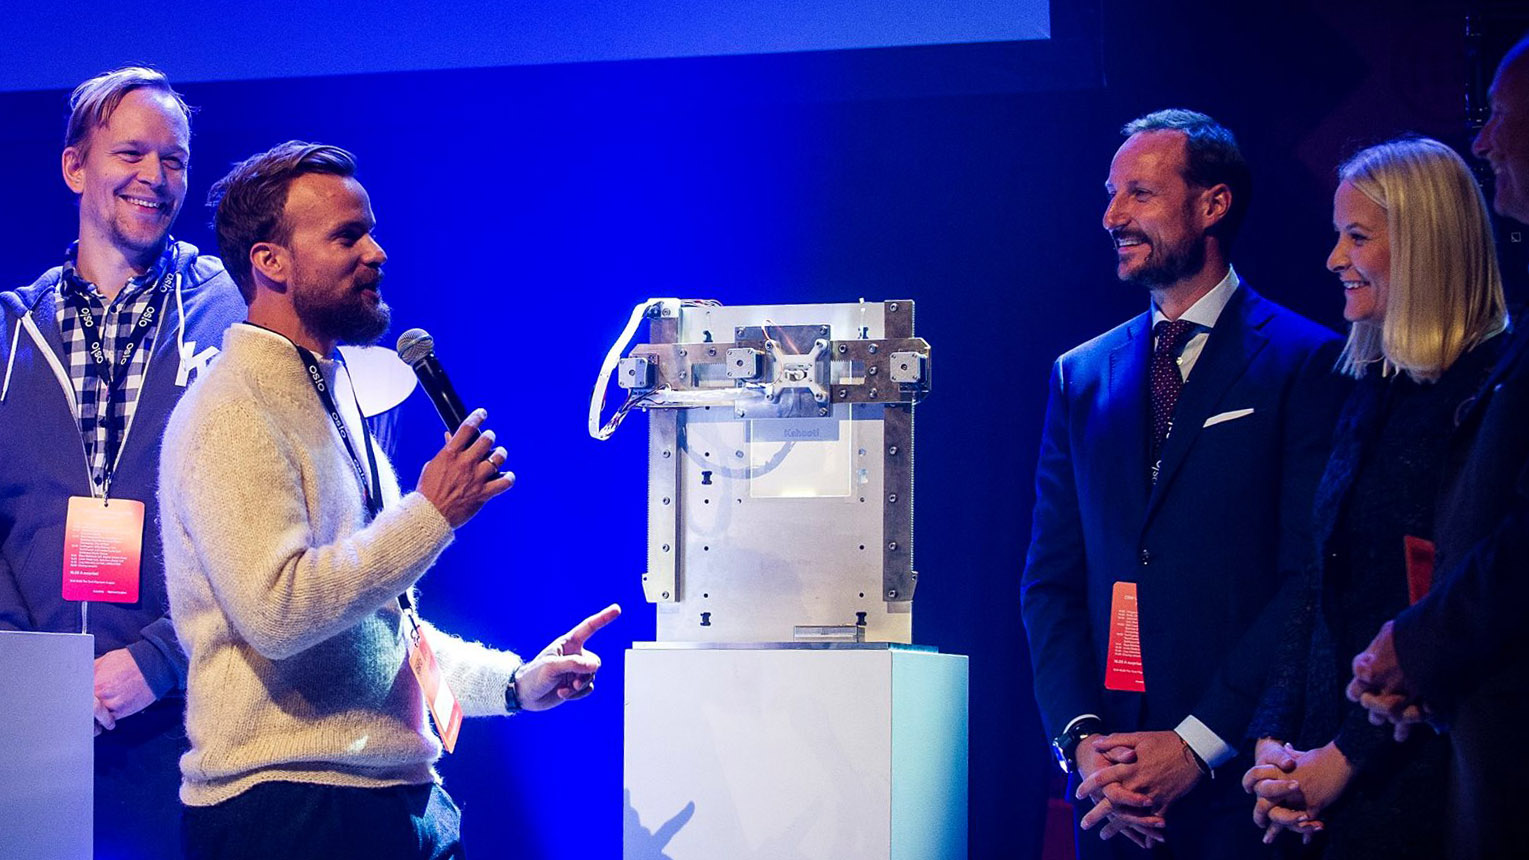 Trophy for the 2016 Oslo Innovation Award - printing diploma on stage